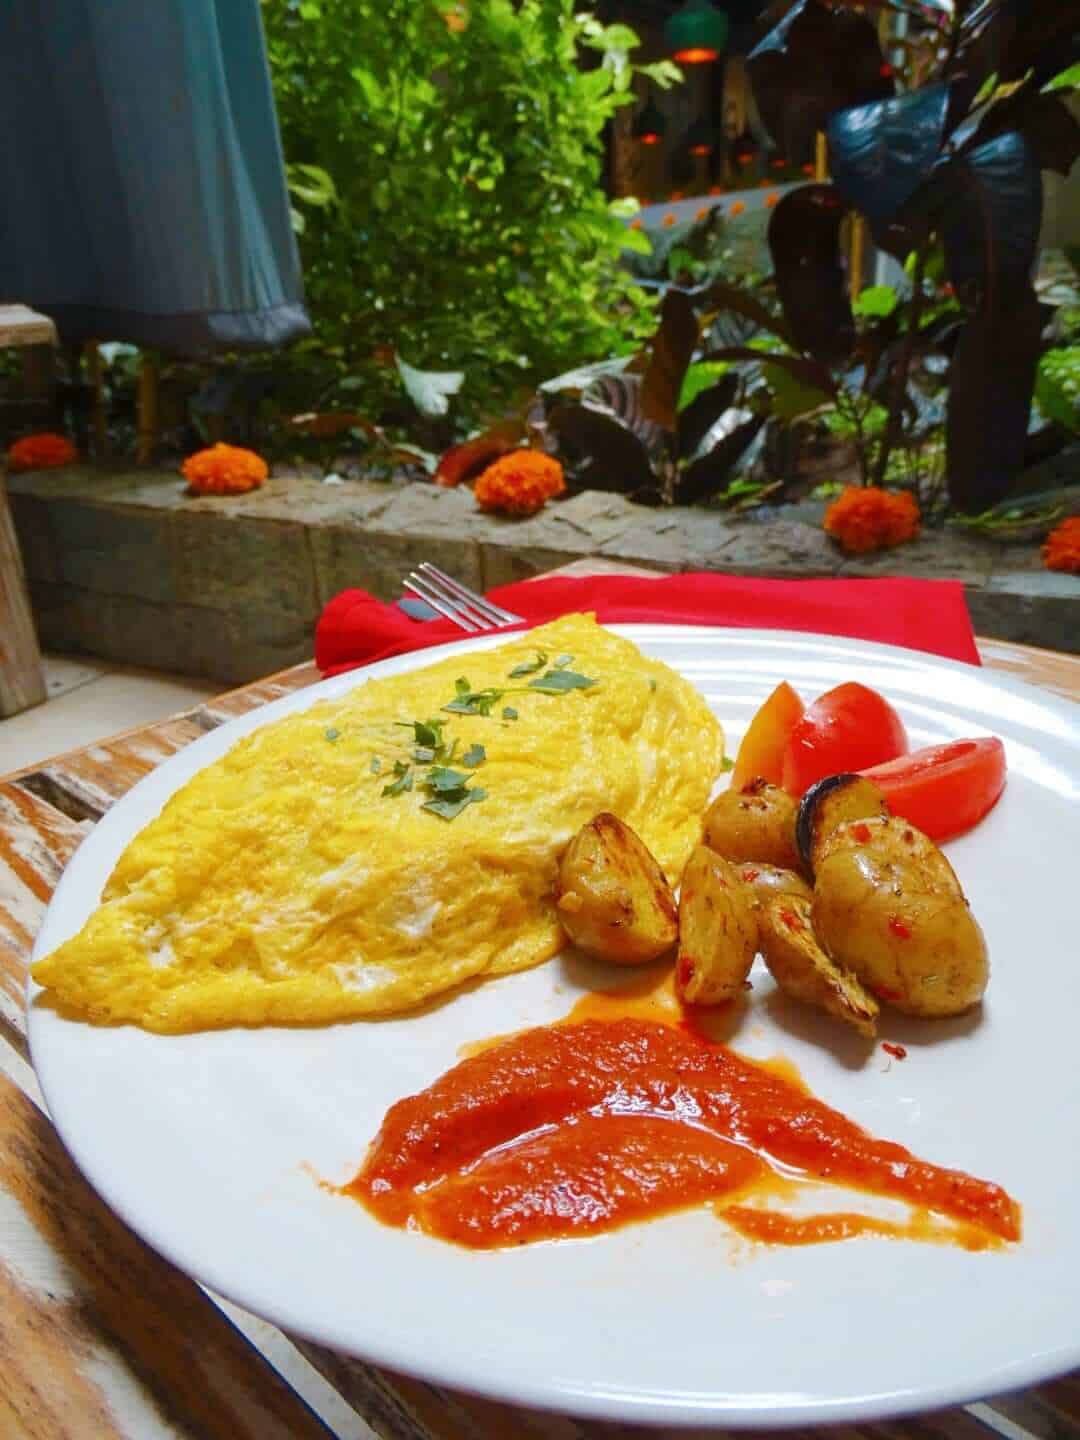 Where to Find the Best Brunch & Breakfast in Ubud - Where Goes Rose?